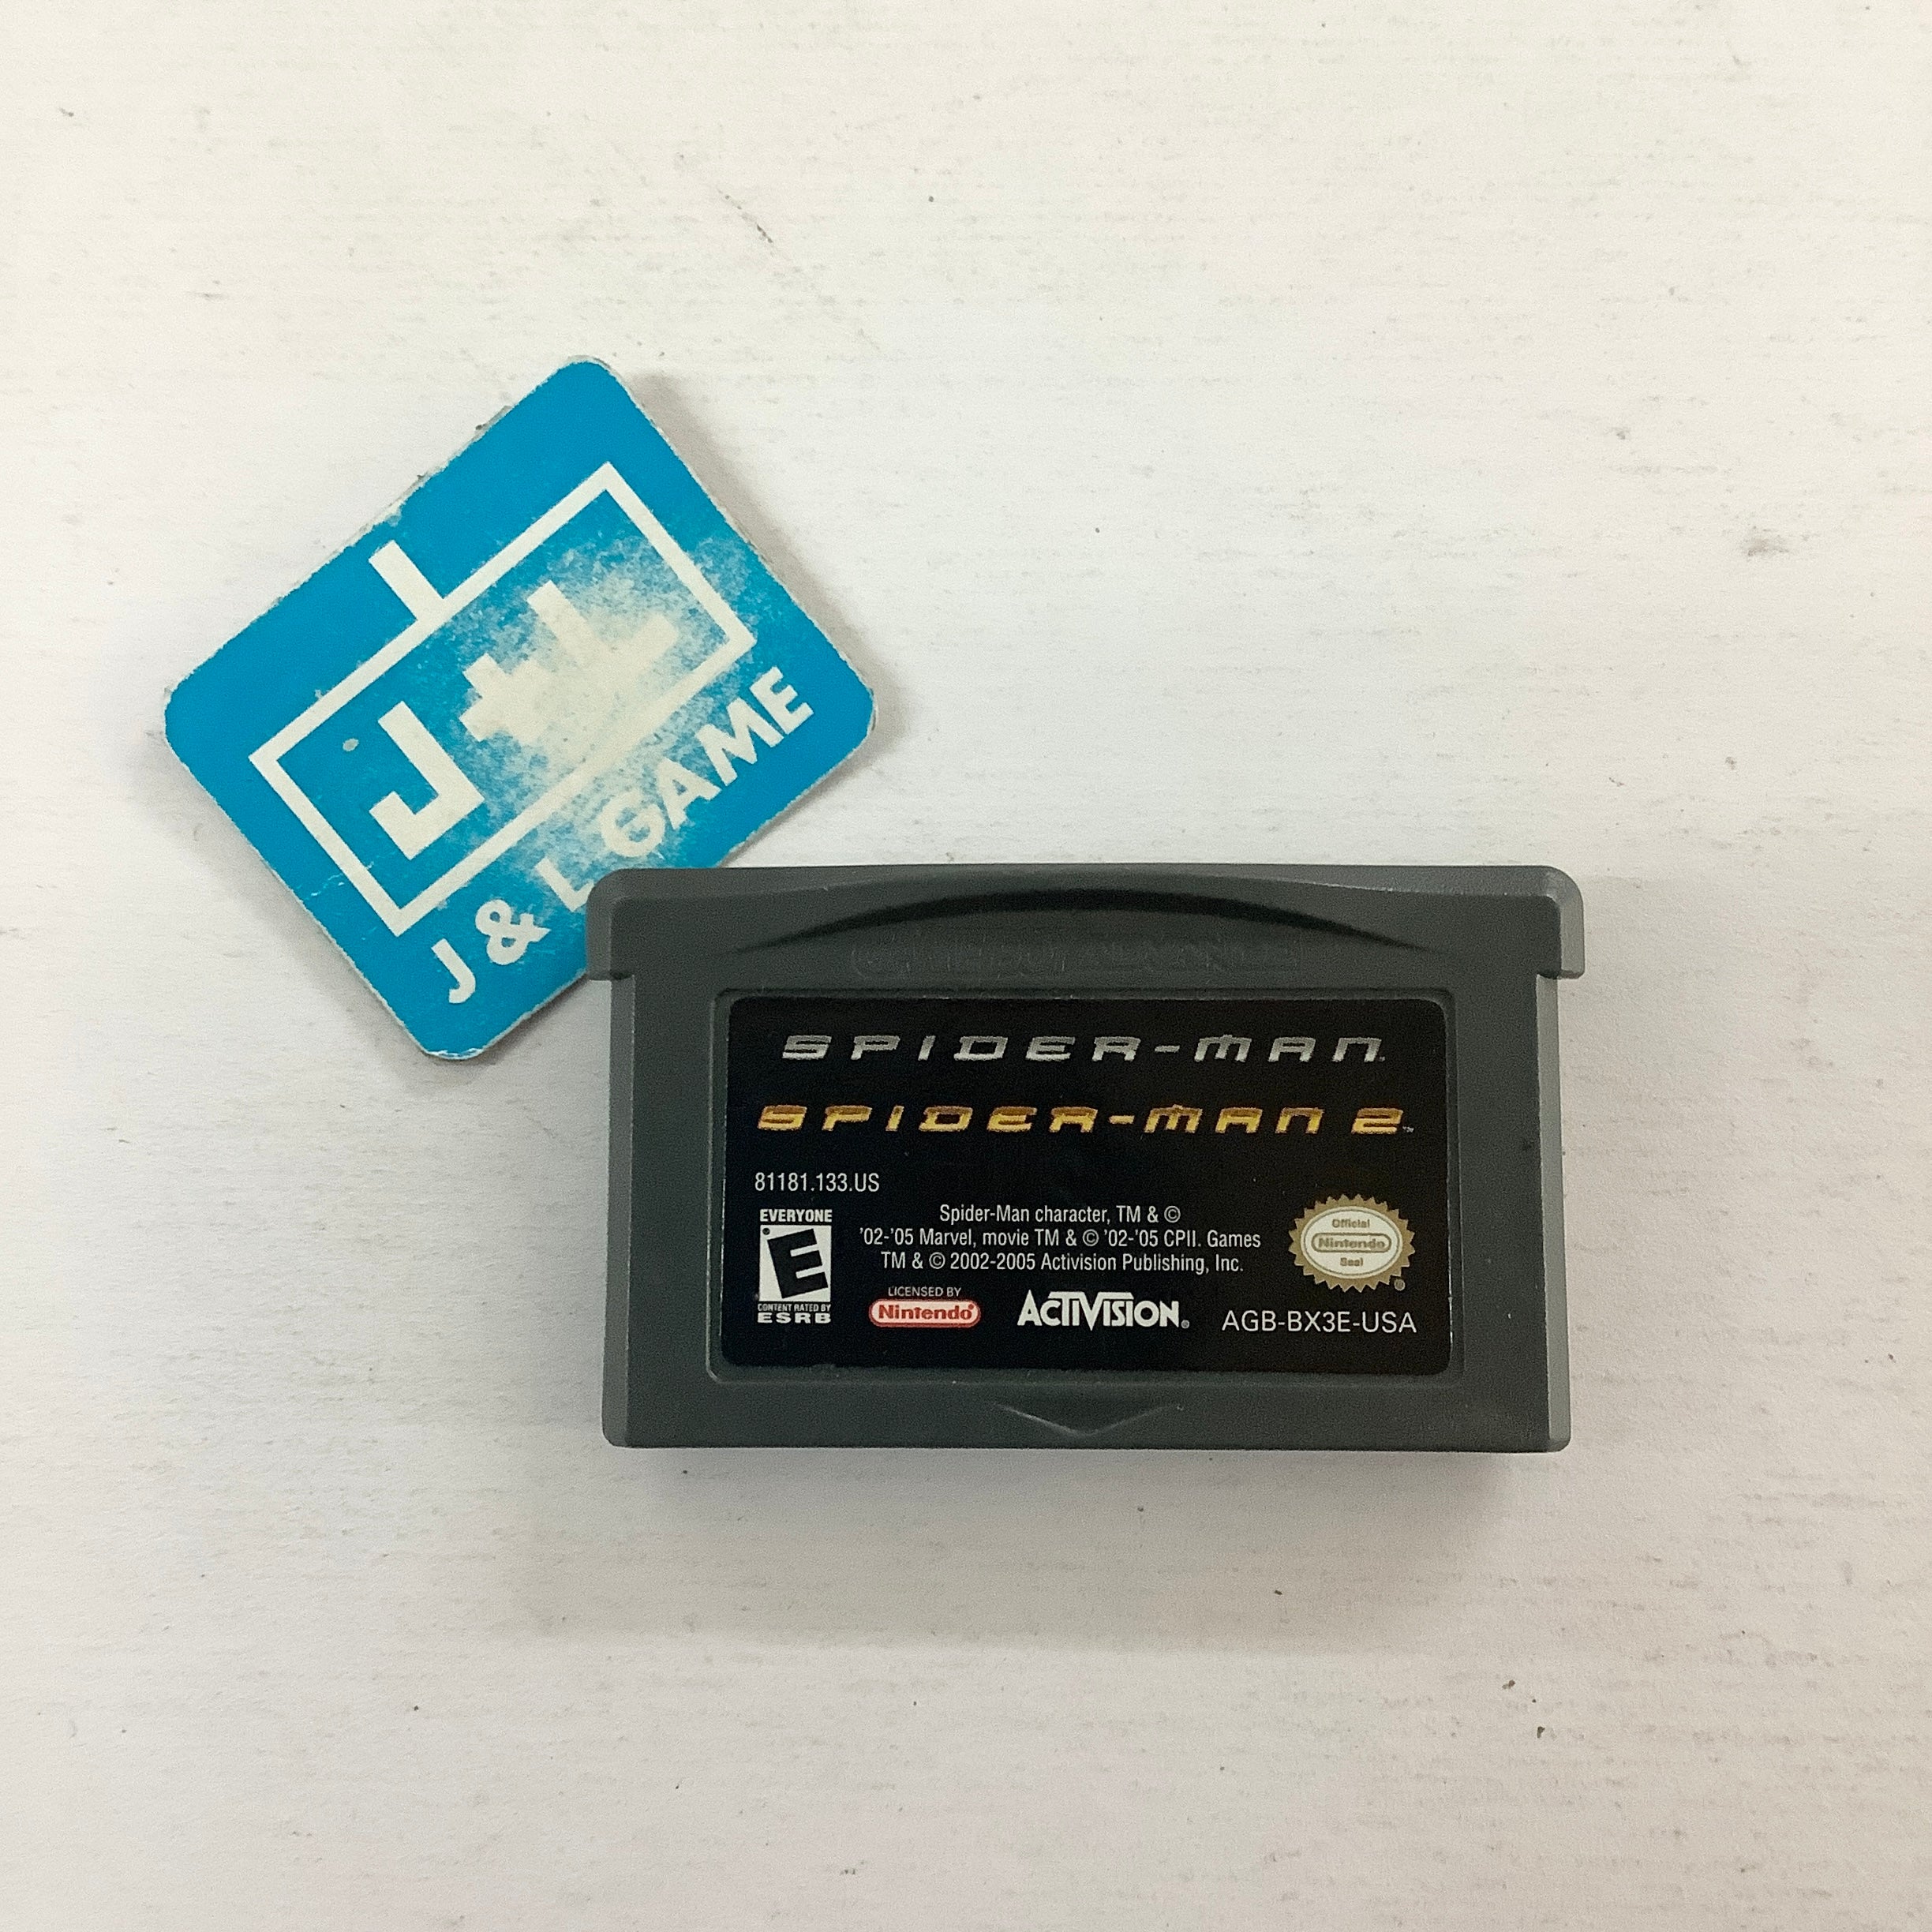 2 In 1 Game Pack: Spider-Man / Spider-Man 2 - (GBA) Game Boy Advance [Pre-Owned]